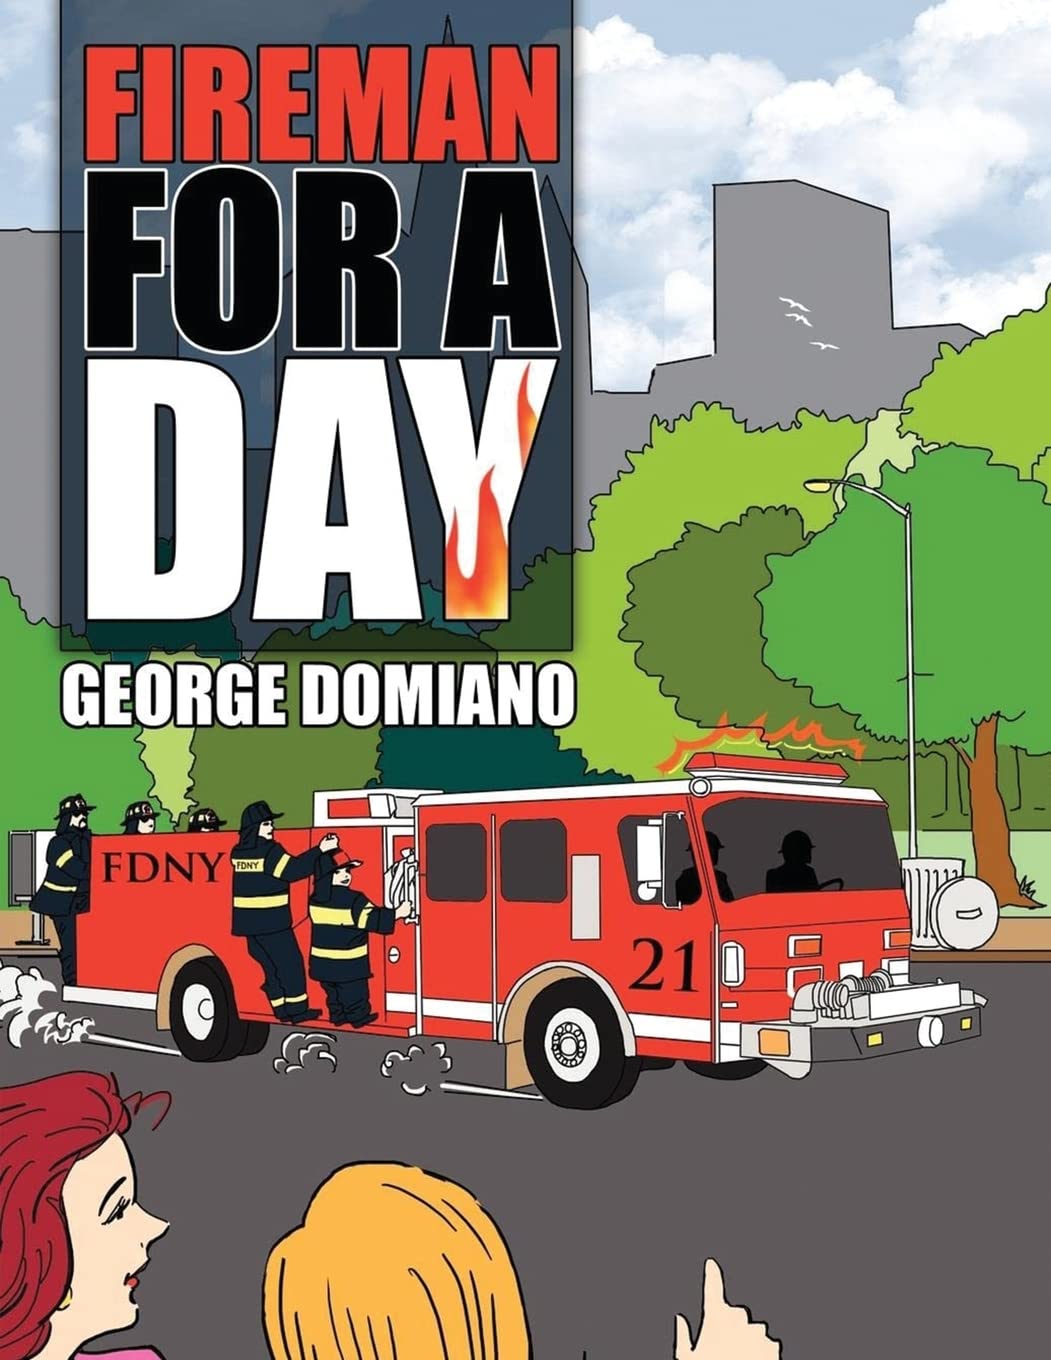 Author's Tranquility Press presents: Fireman for a Day - A Heartwarming Story of a Father and Son